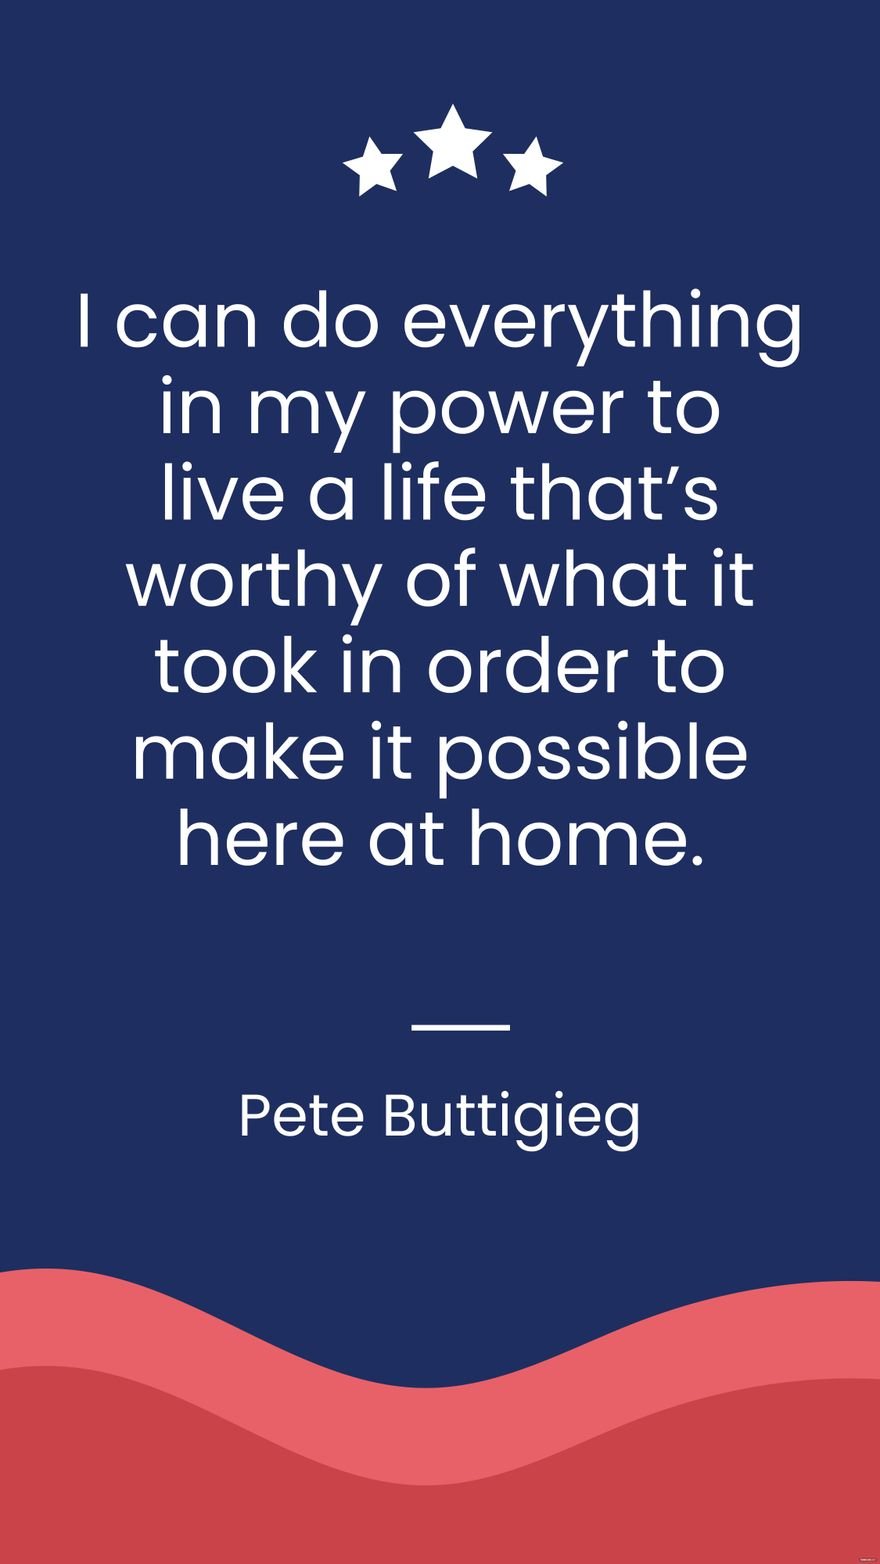 Free Pete Buttigieg - I can do everything in my power to live a life that's worthy of what it took in order to make it possible to be here at home.